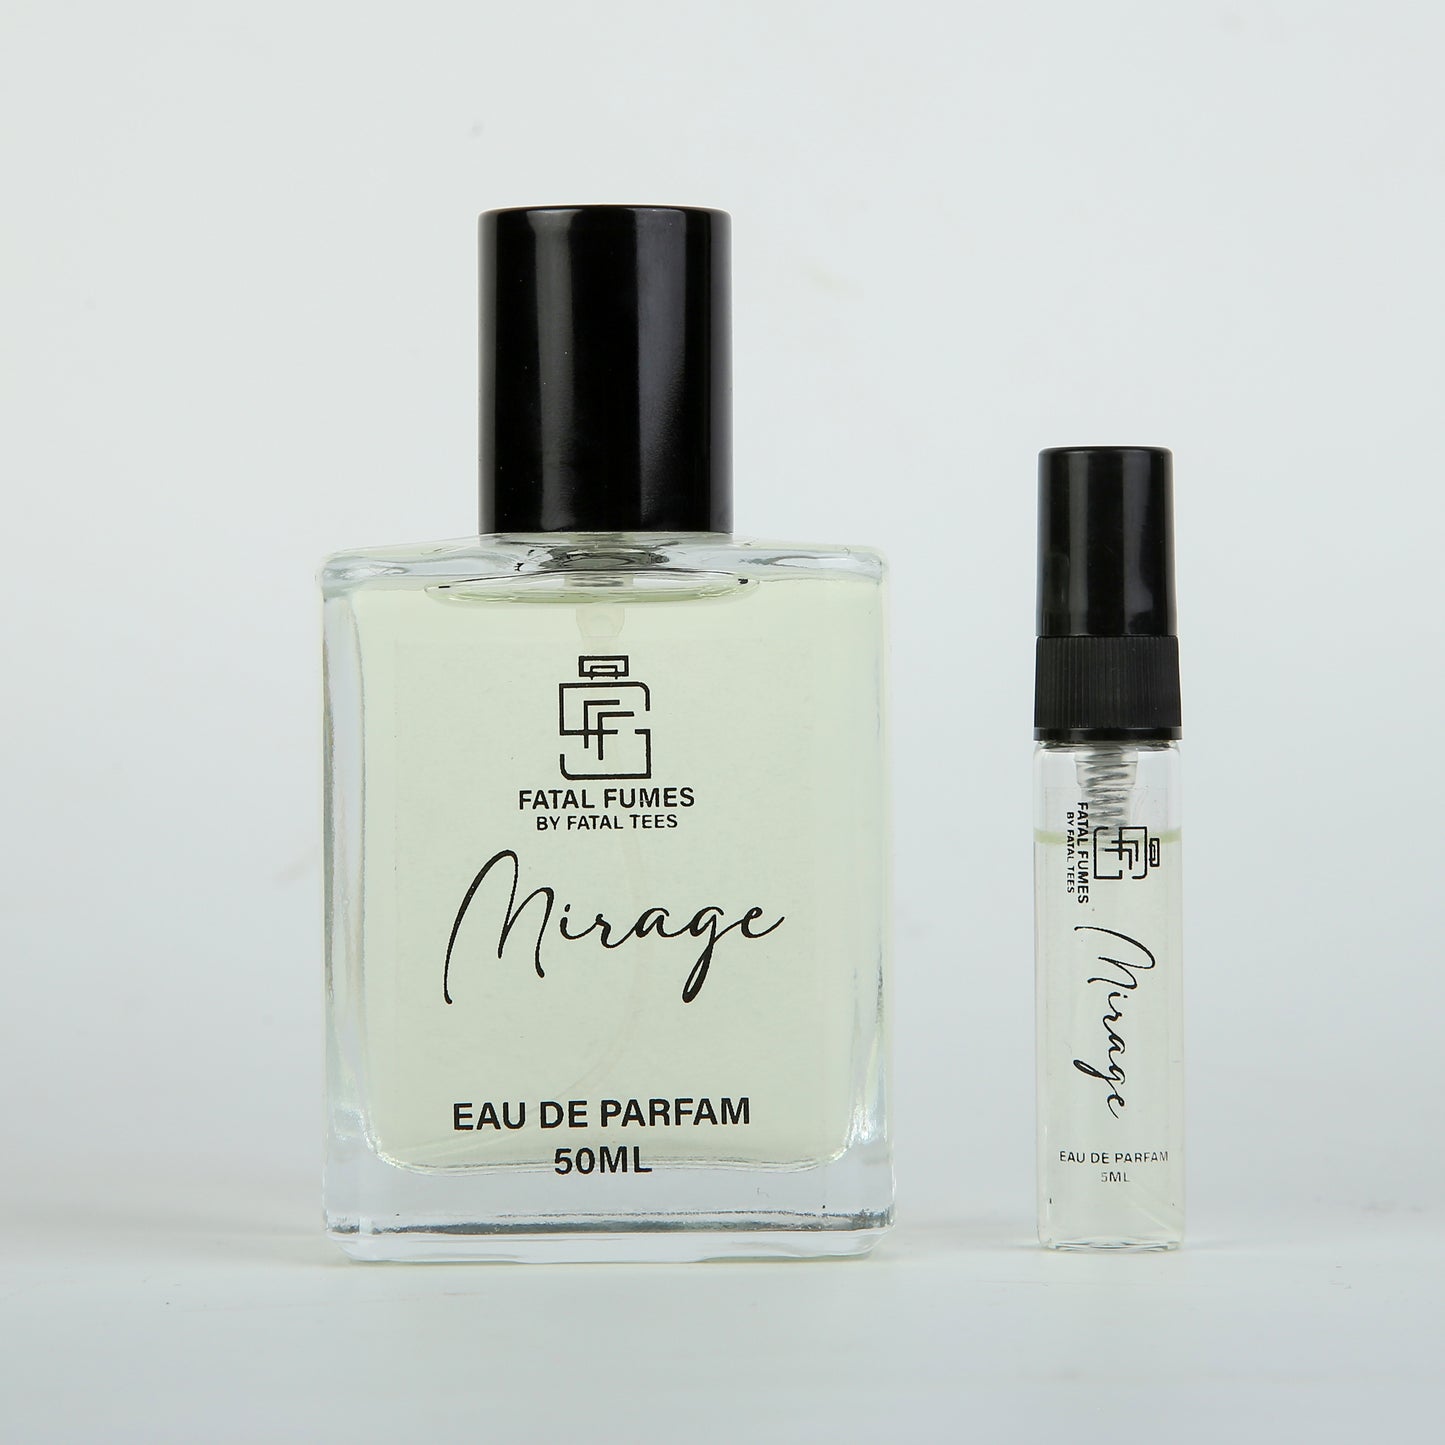 Mirage by Fatal Fumes